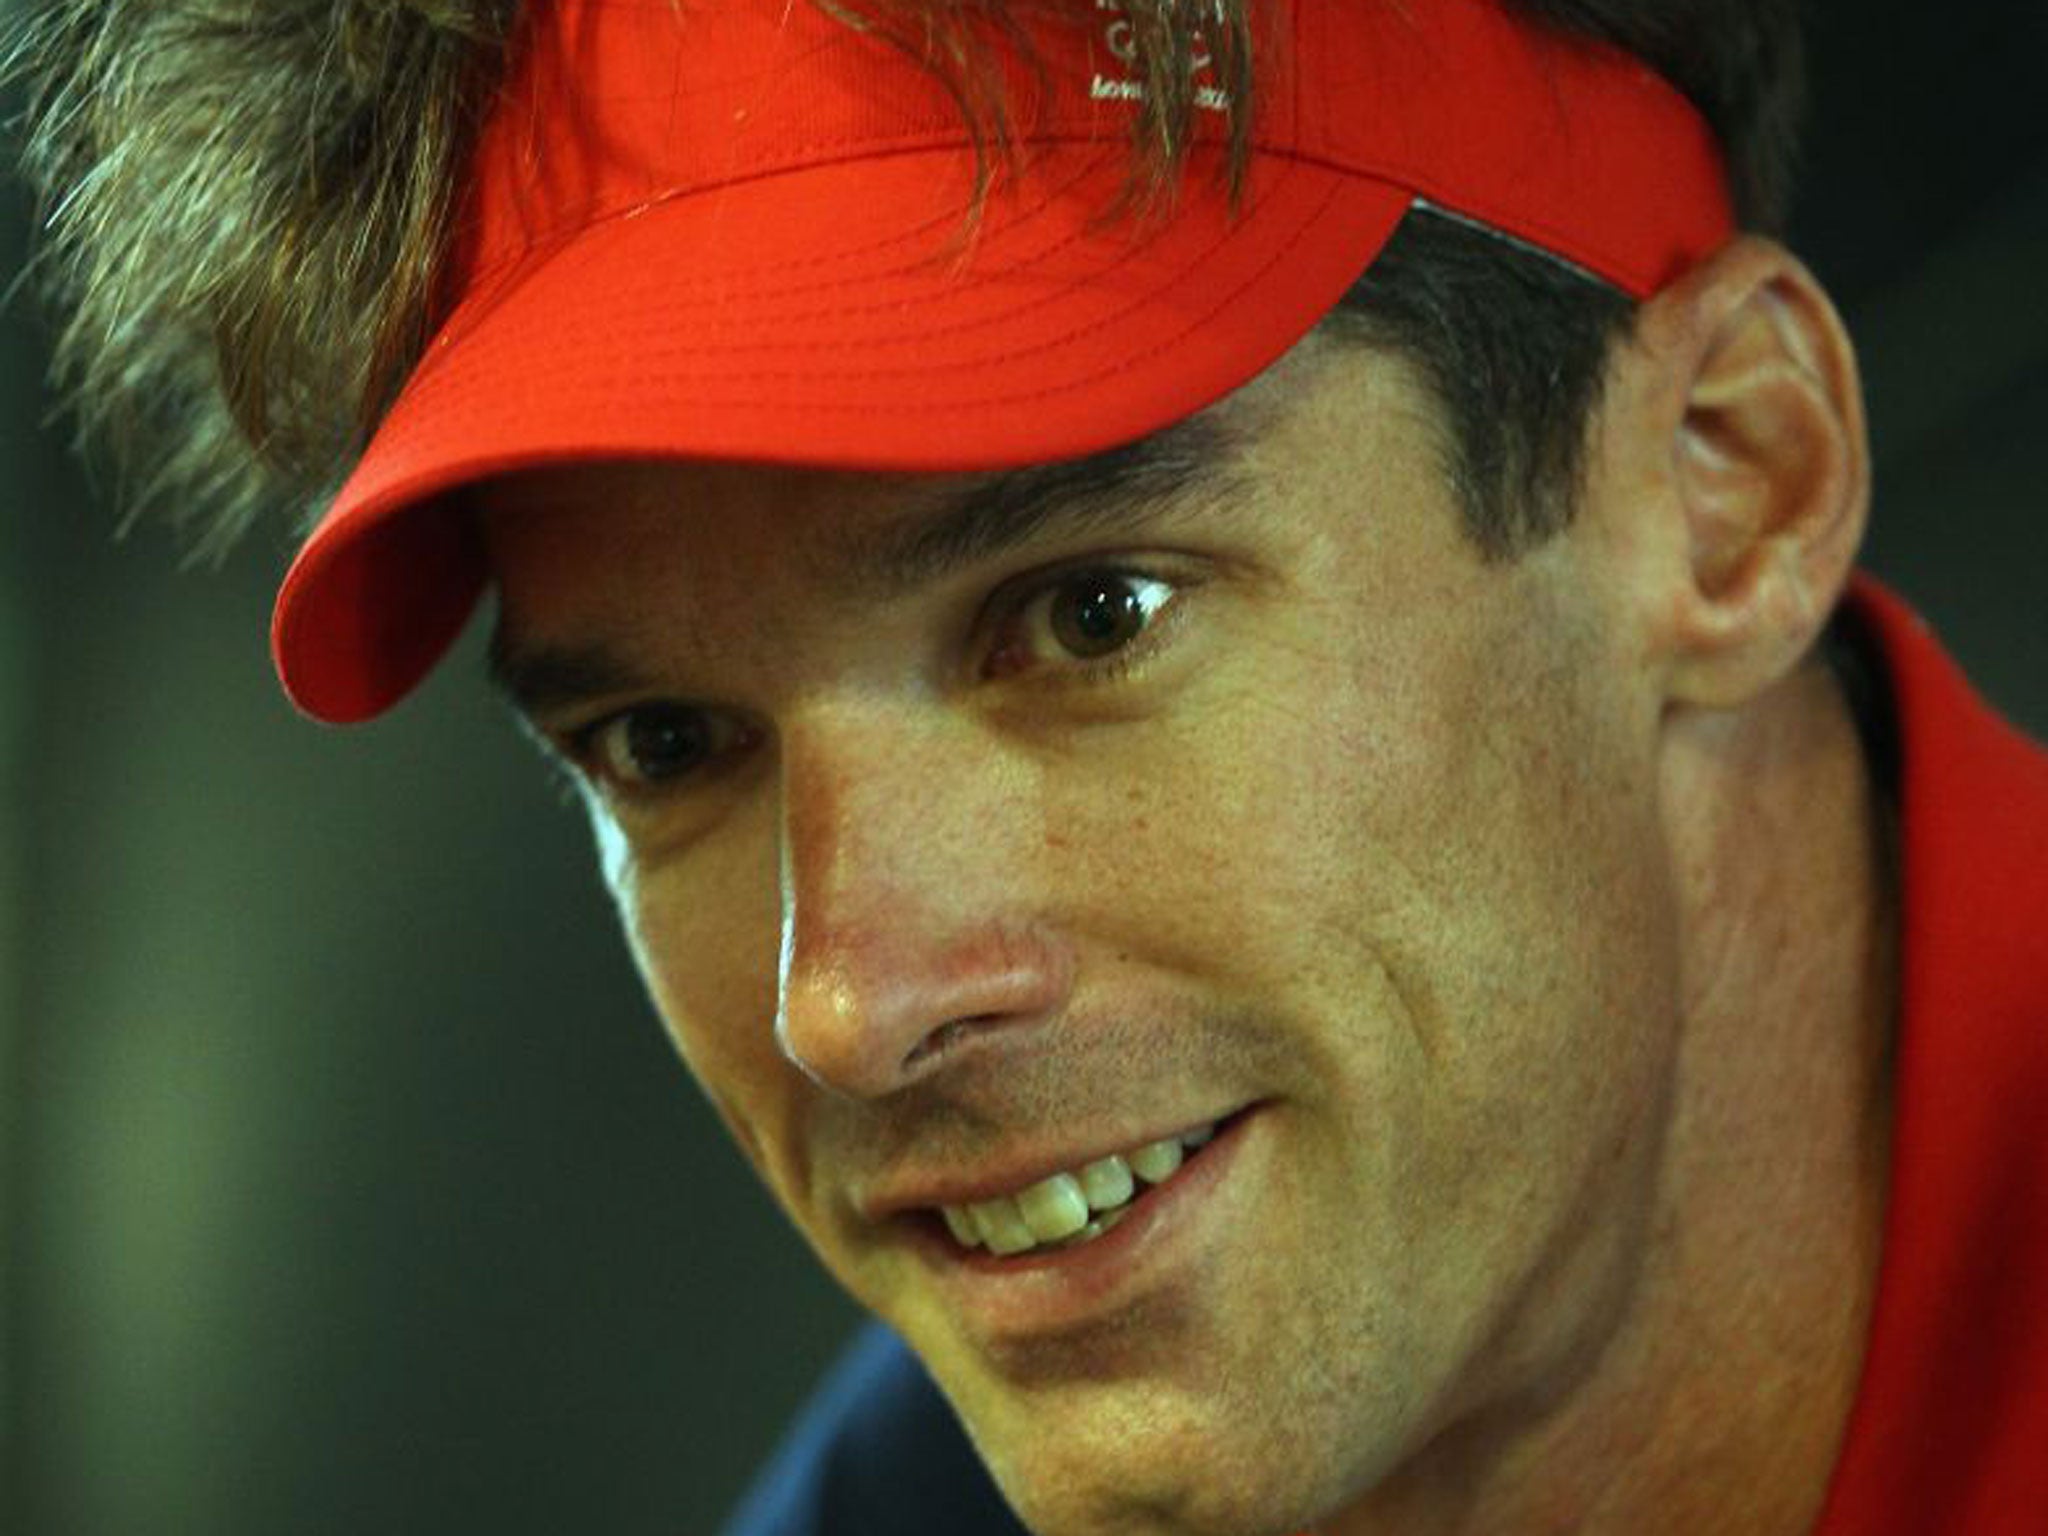 "You should be punished for past wrongs, but it should be realistic," says David Millar